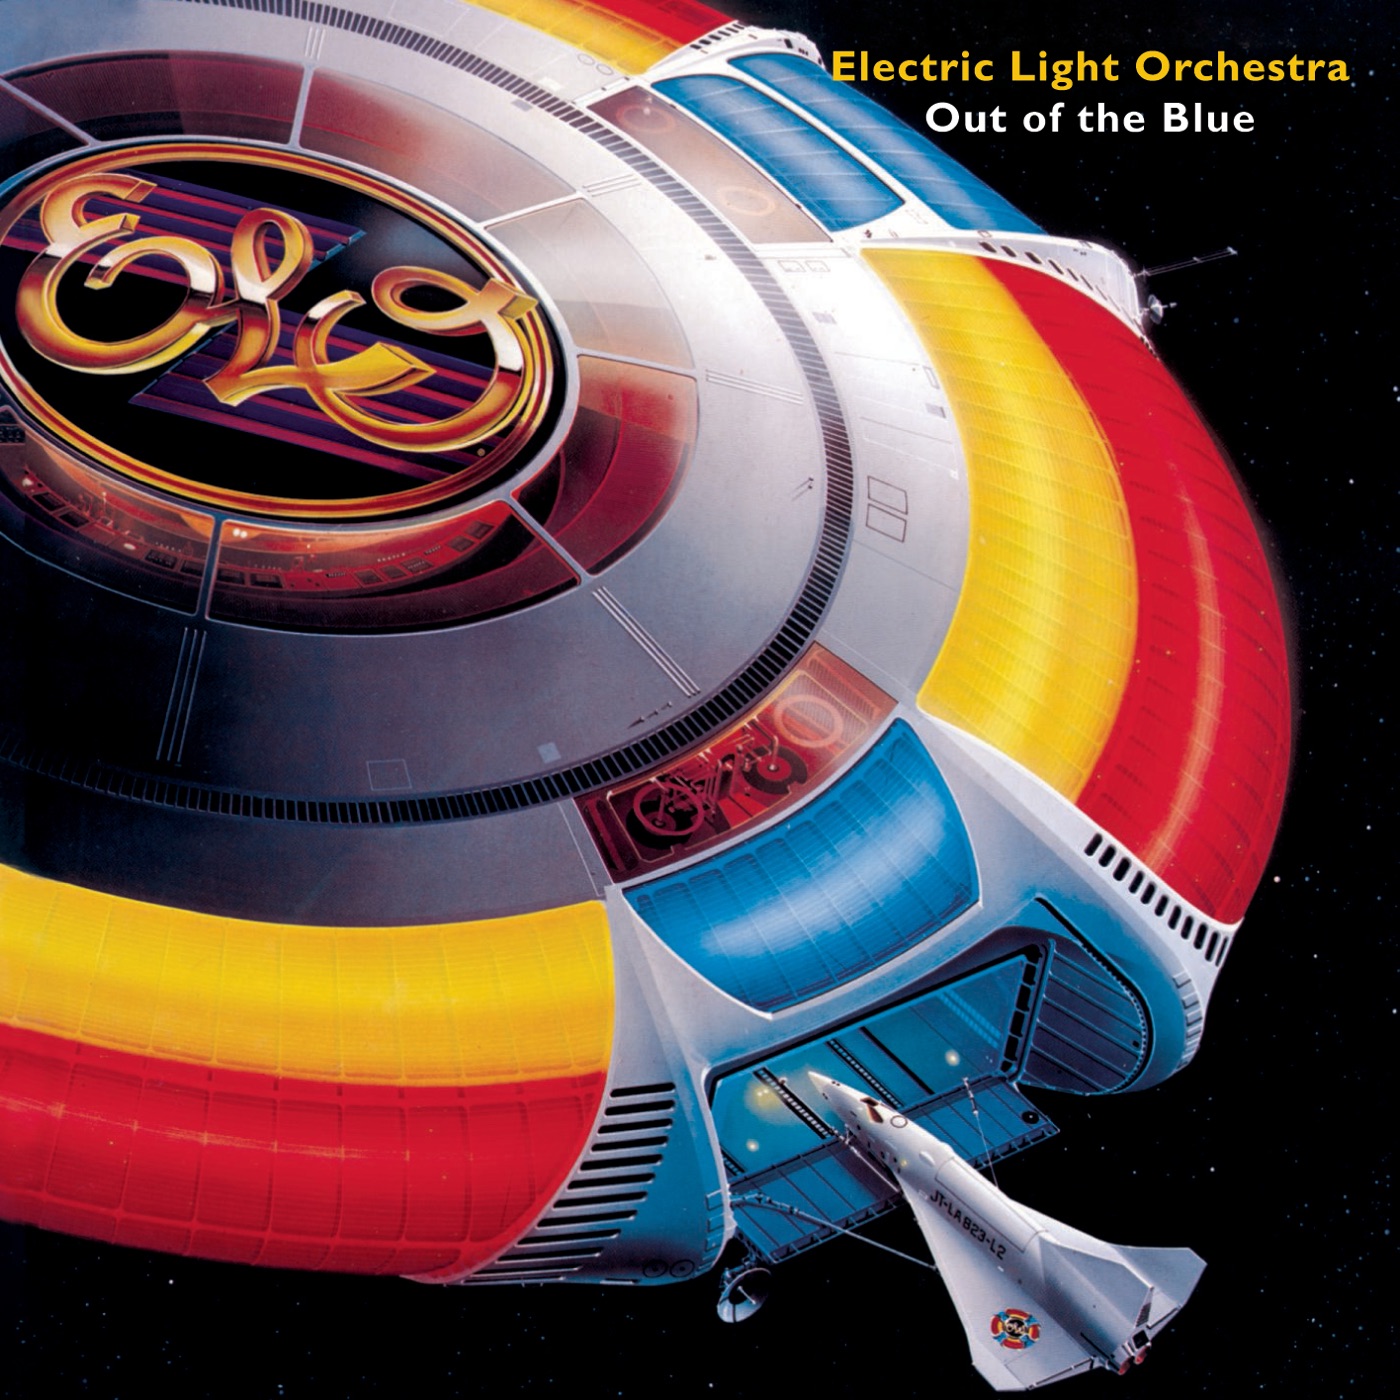 Out of the Blue by Electric Light Orchestra